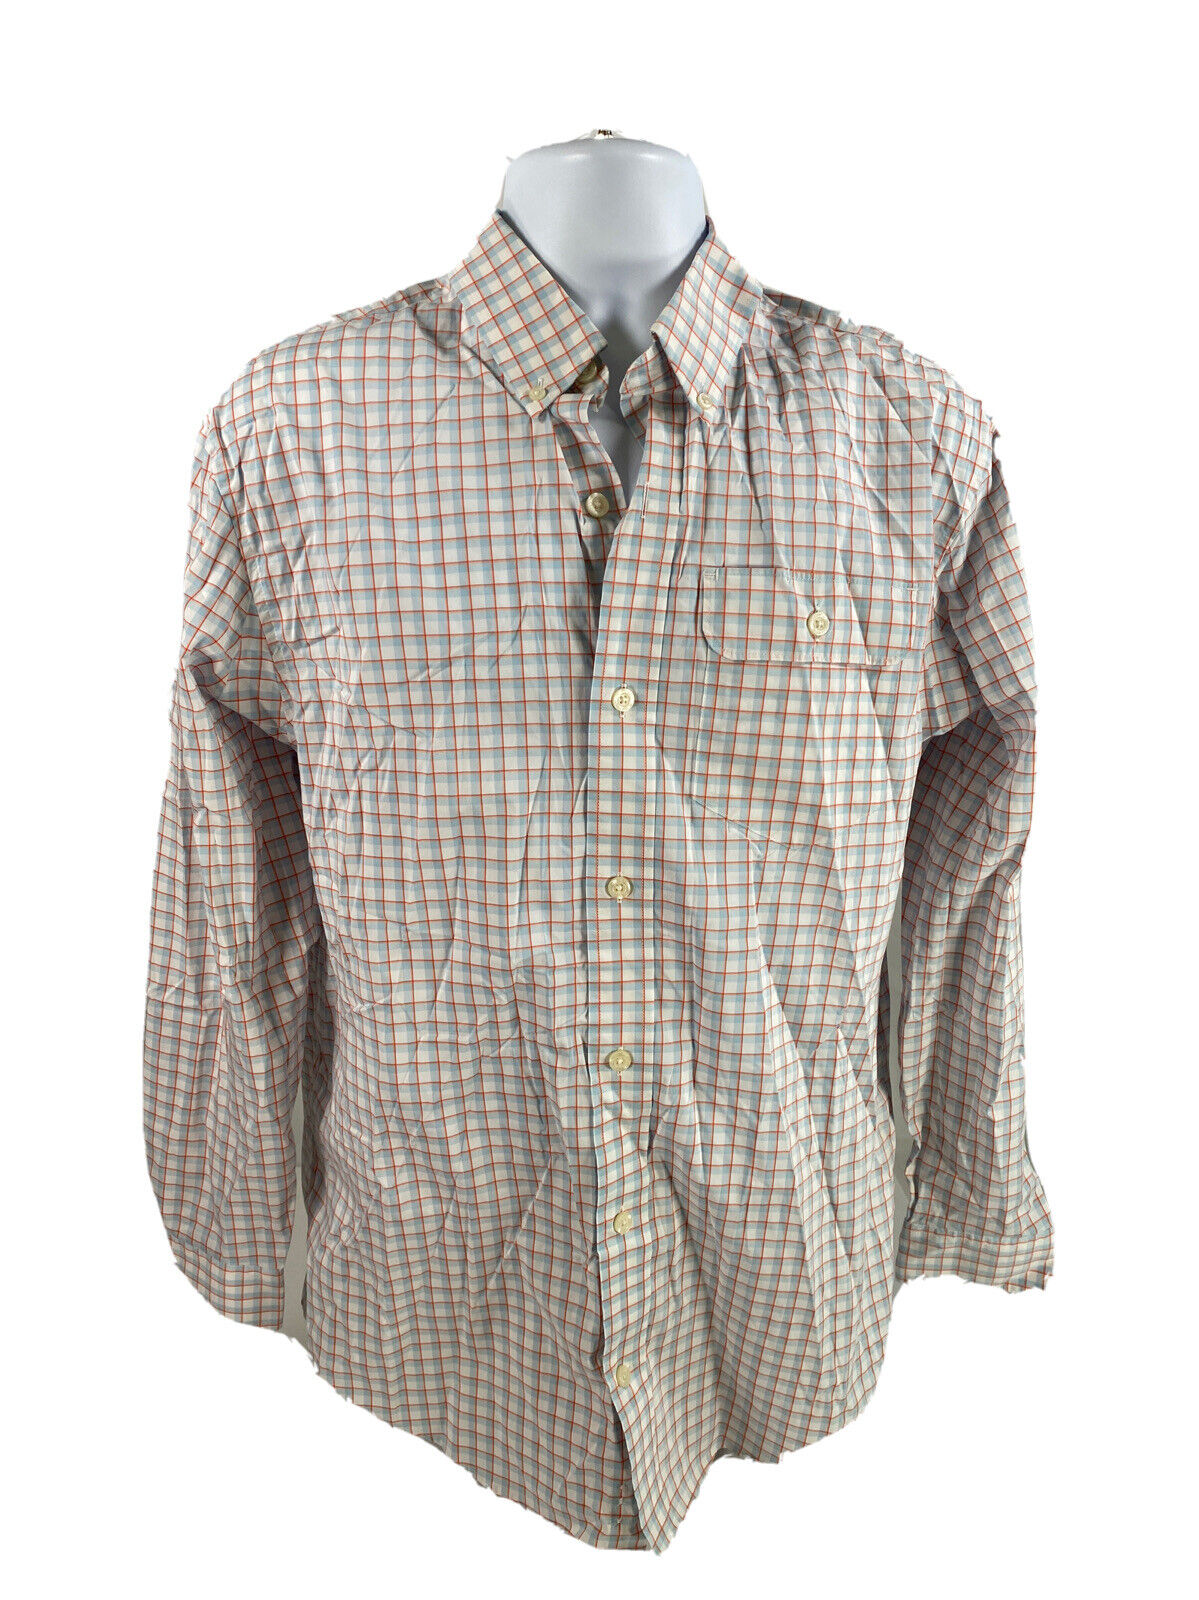 Duluth Trading Men's Blue/Red Checkered Relaxed Fit Button Up Shirt - M